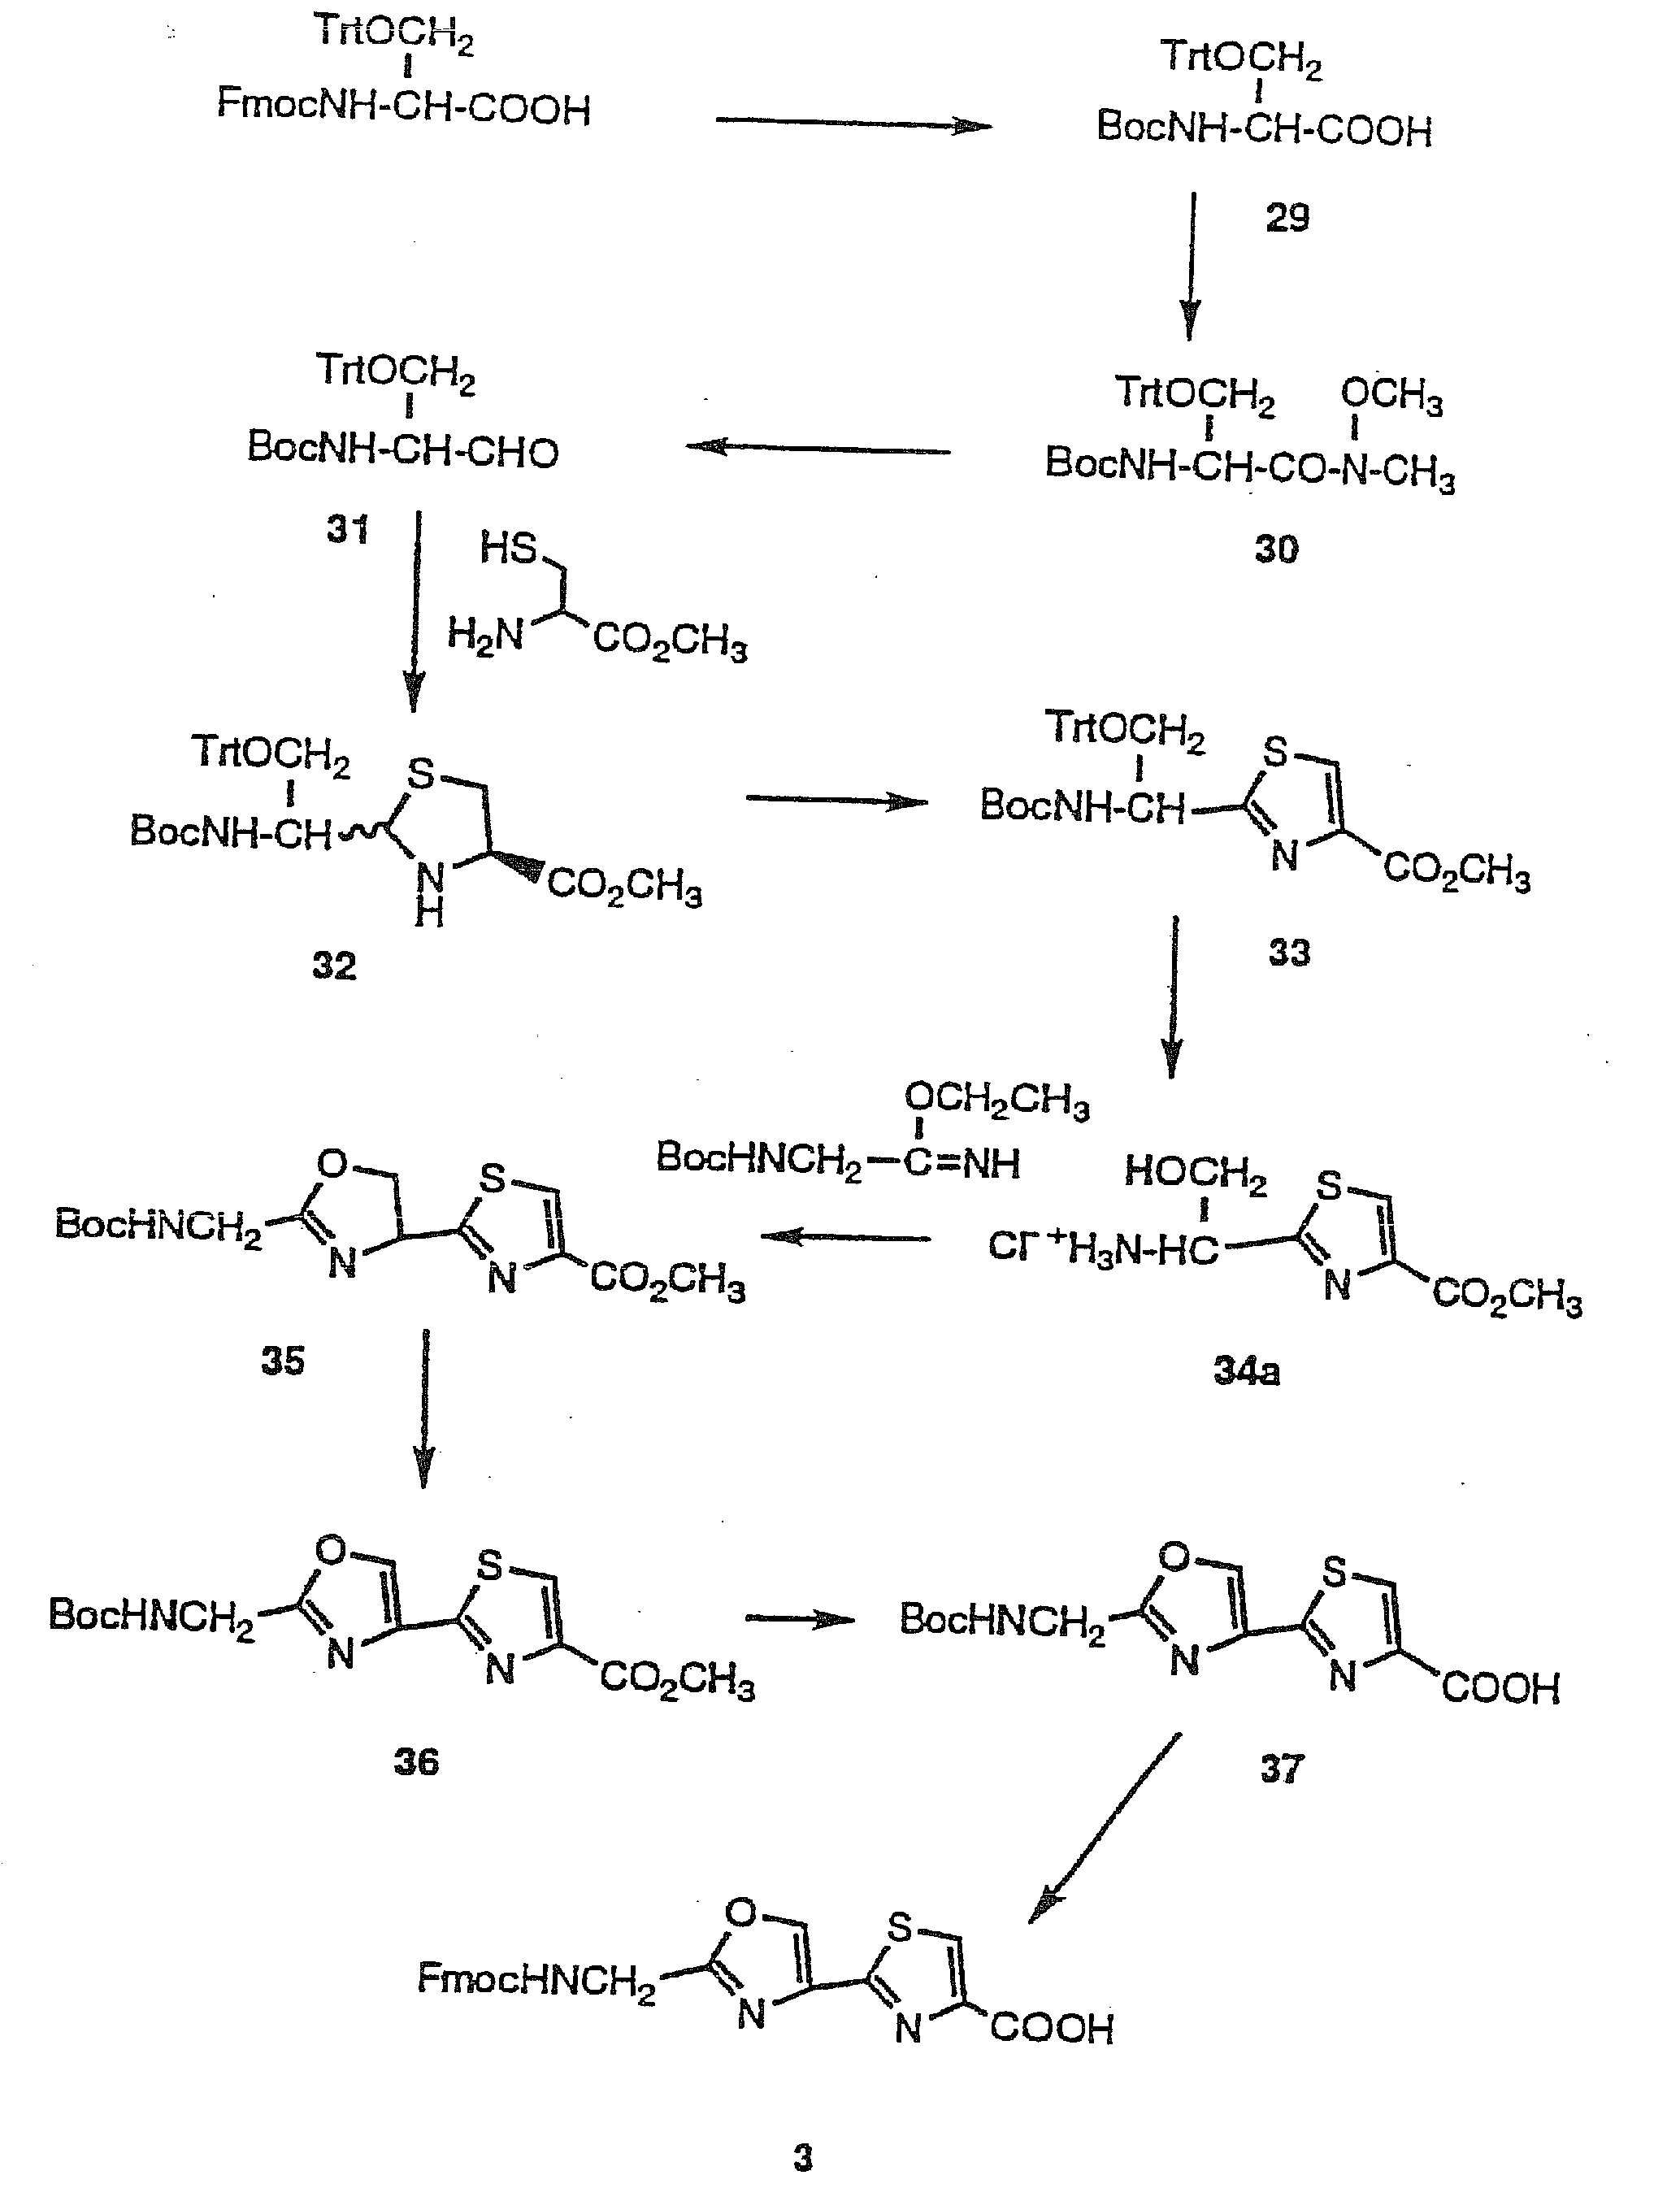 Oxazole and thiazole combinatorial libraries